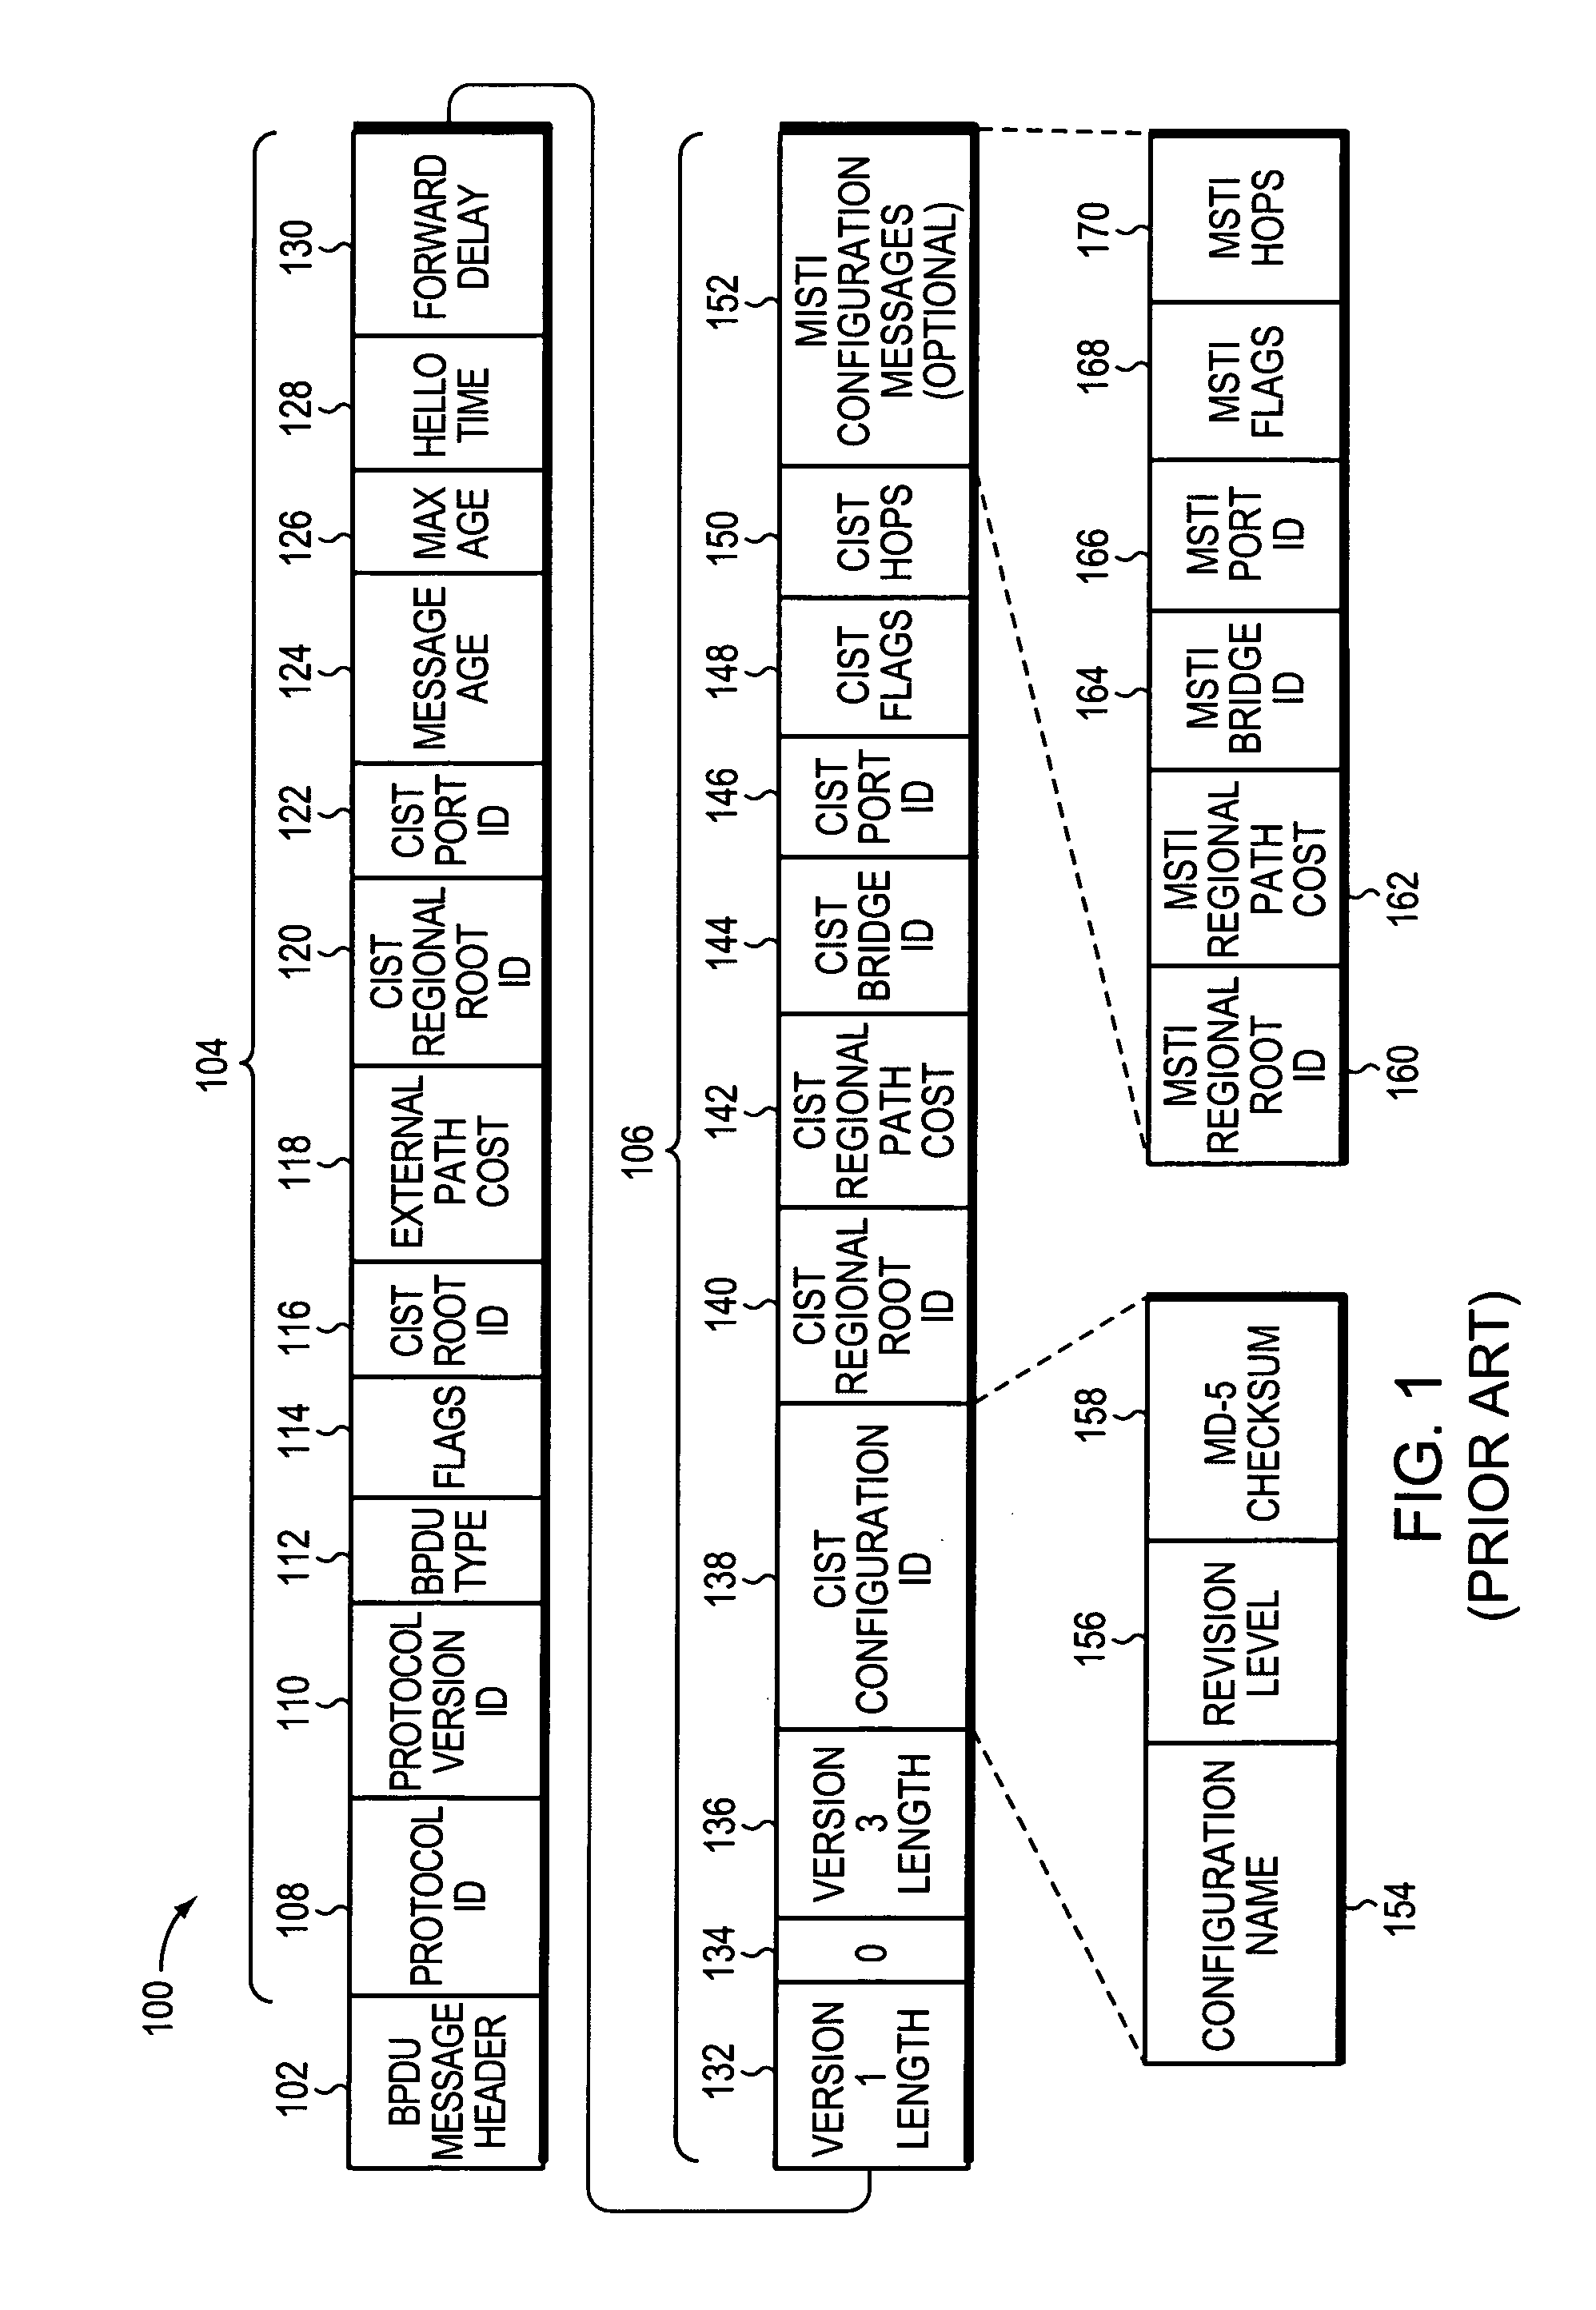 System and method for building large-scale layer 2 computer networks